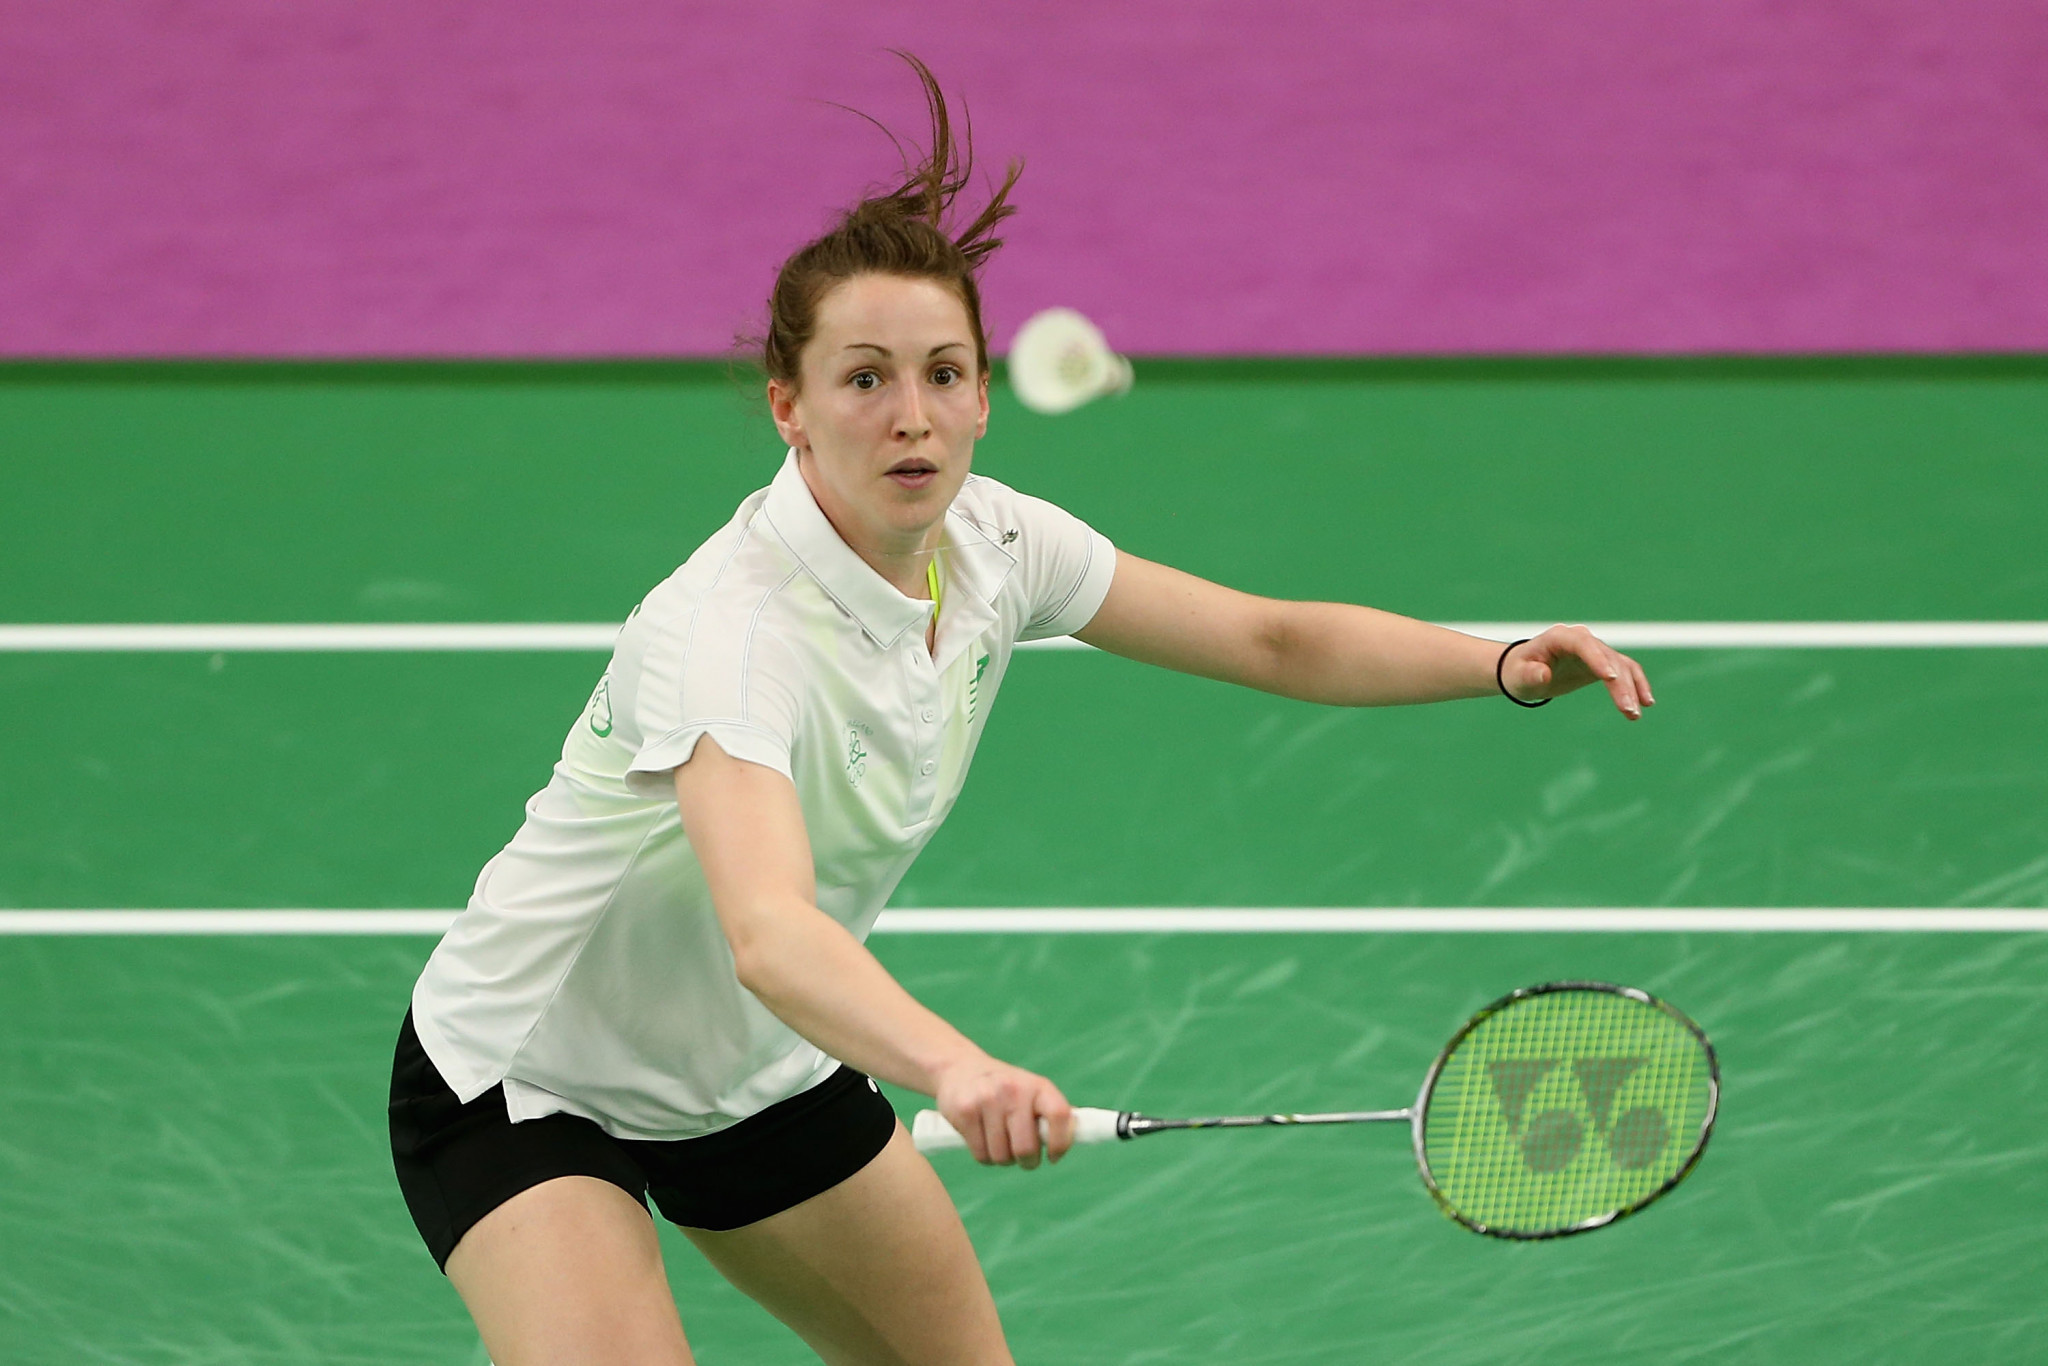 Badminton player Chloe Magee will be Ireland's flagbearer at the Opening Ceremony of the Minsk 2019 European Games ©Getty Images